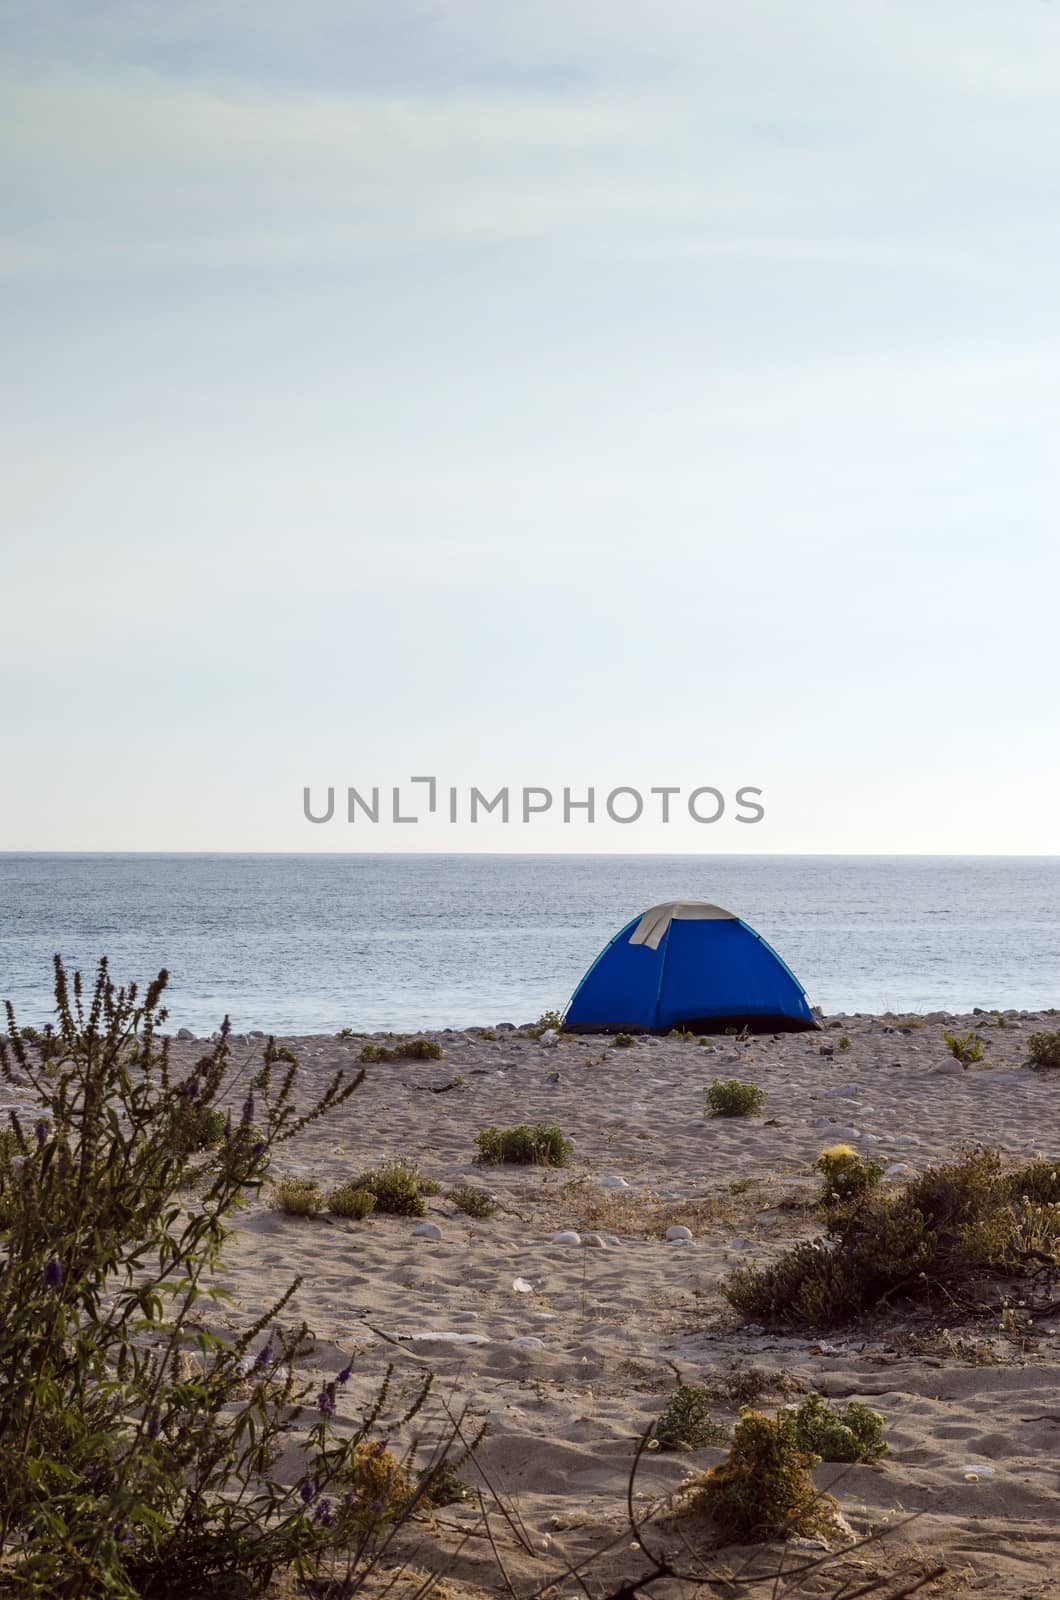 Tent camping on a lonely sandy beach.